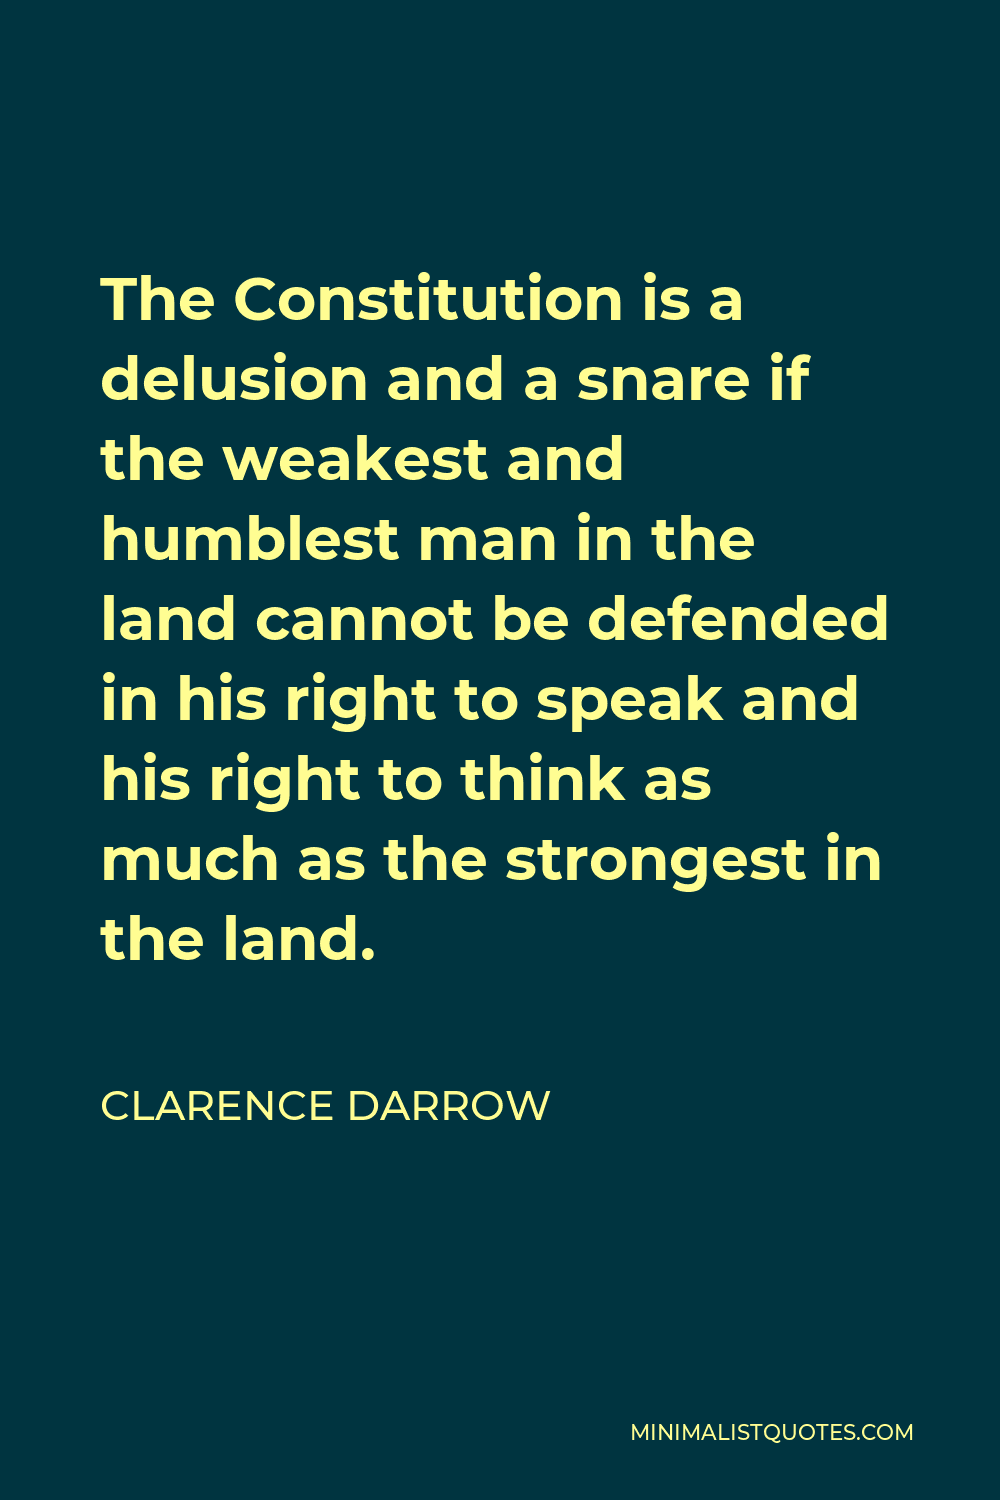 Clarence Darrow Quote - The Constitution is a delusion and a snare if the weakest and humblest man in the land cannot be defended in his right to speak and his right to think as much as the strongest in the land.